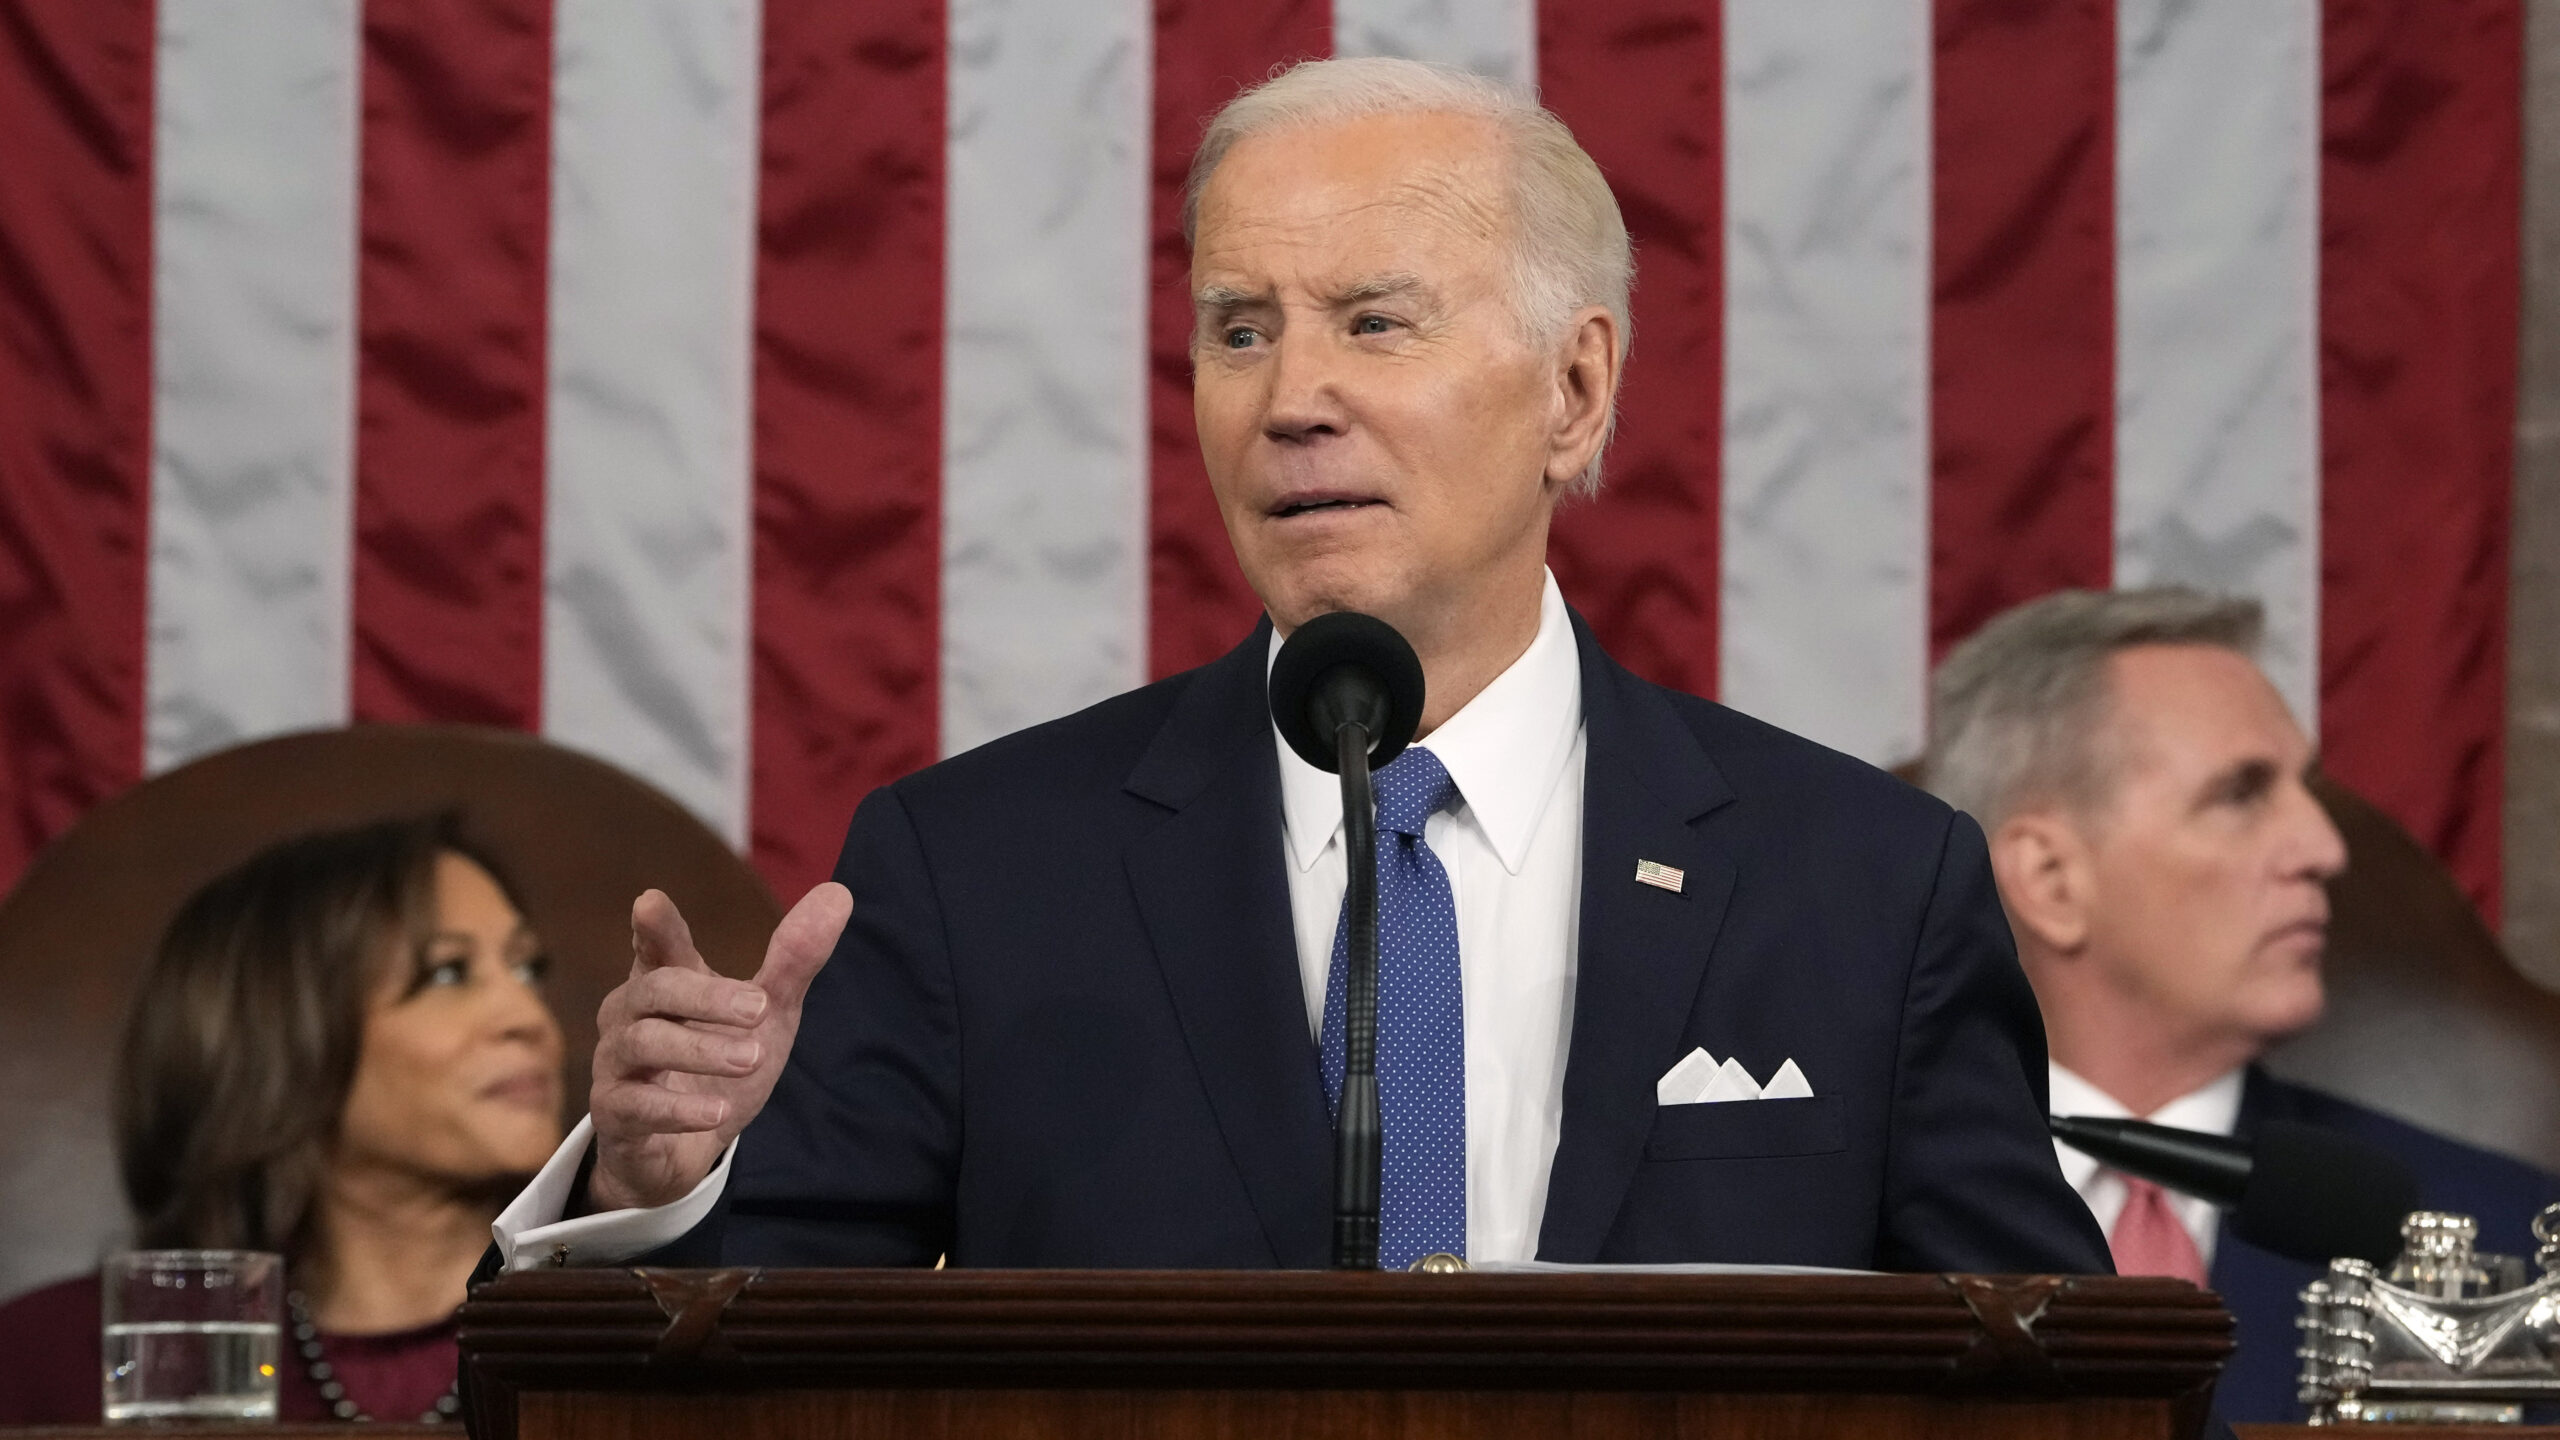 House speaker invites Biden to deliver State of the Union on March 7